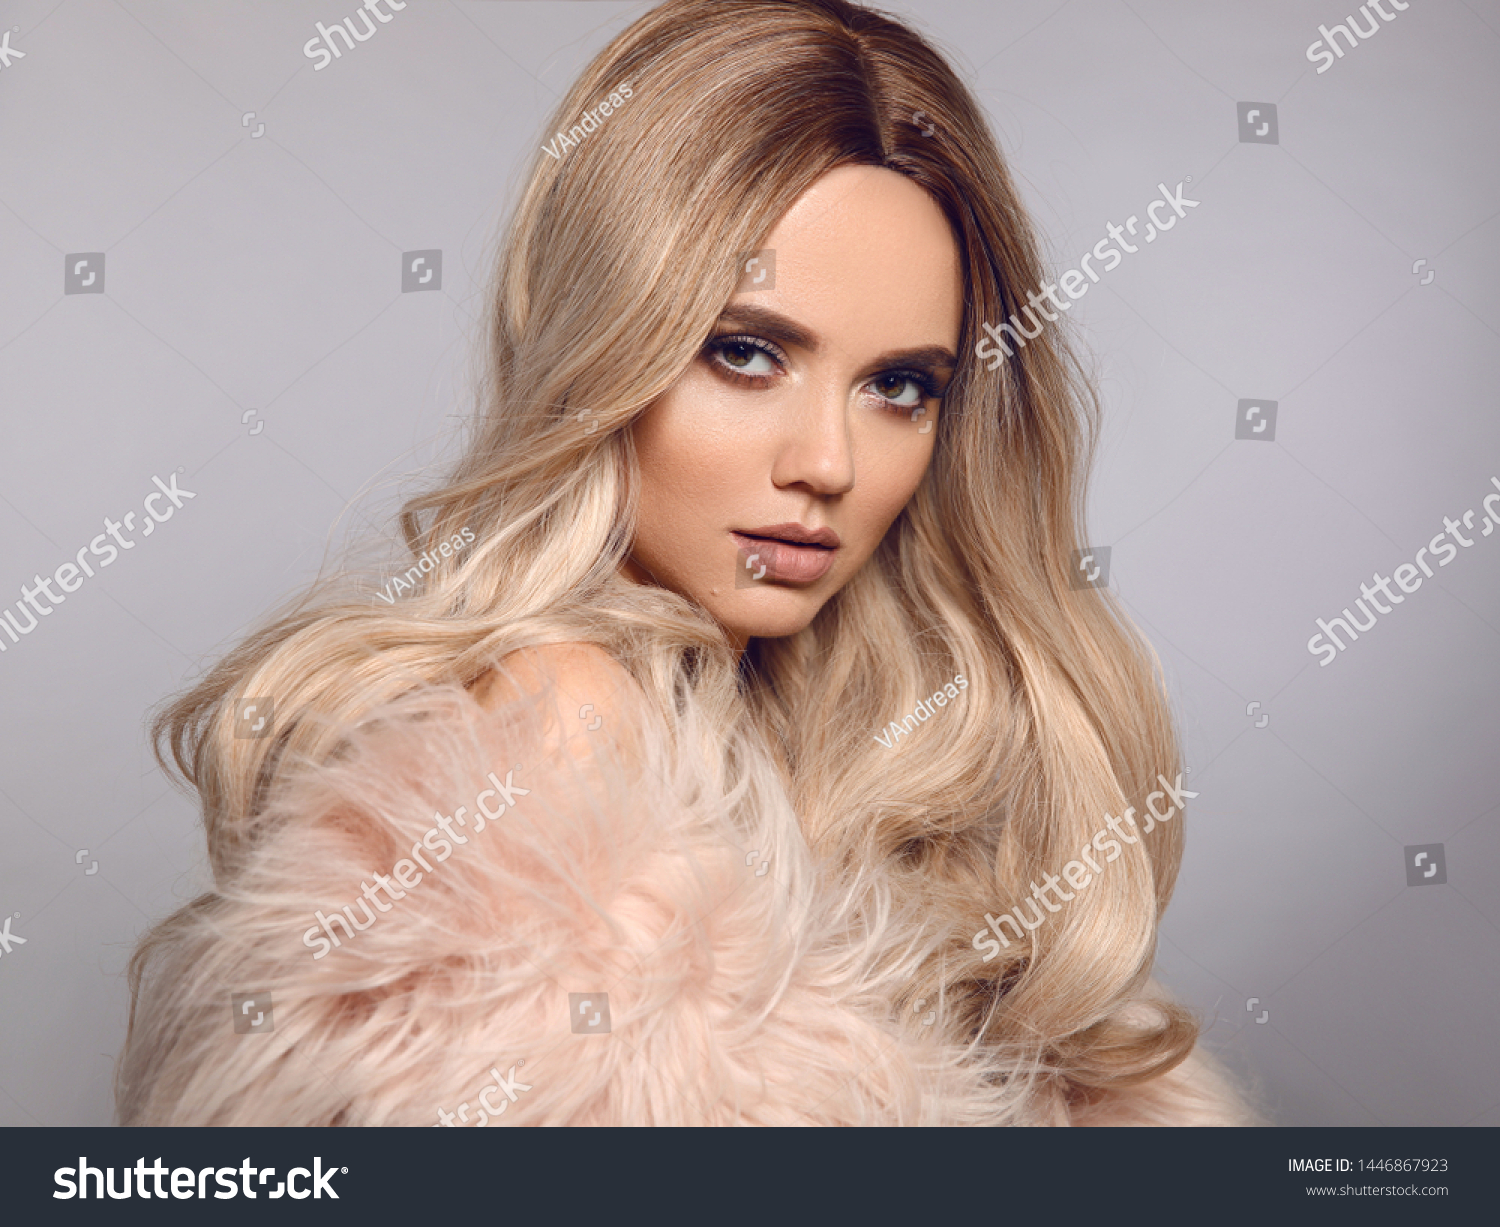 Ombre blond shiny hair. Beauty fashion blonde woman portrait. Beautiful girl model with makeup, long healthy hairstyle posing isolated on studio grey background. #1446867923